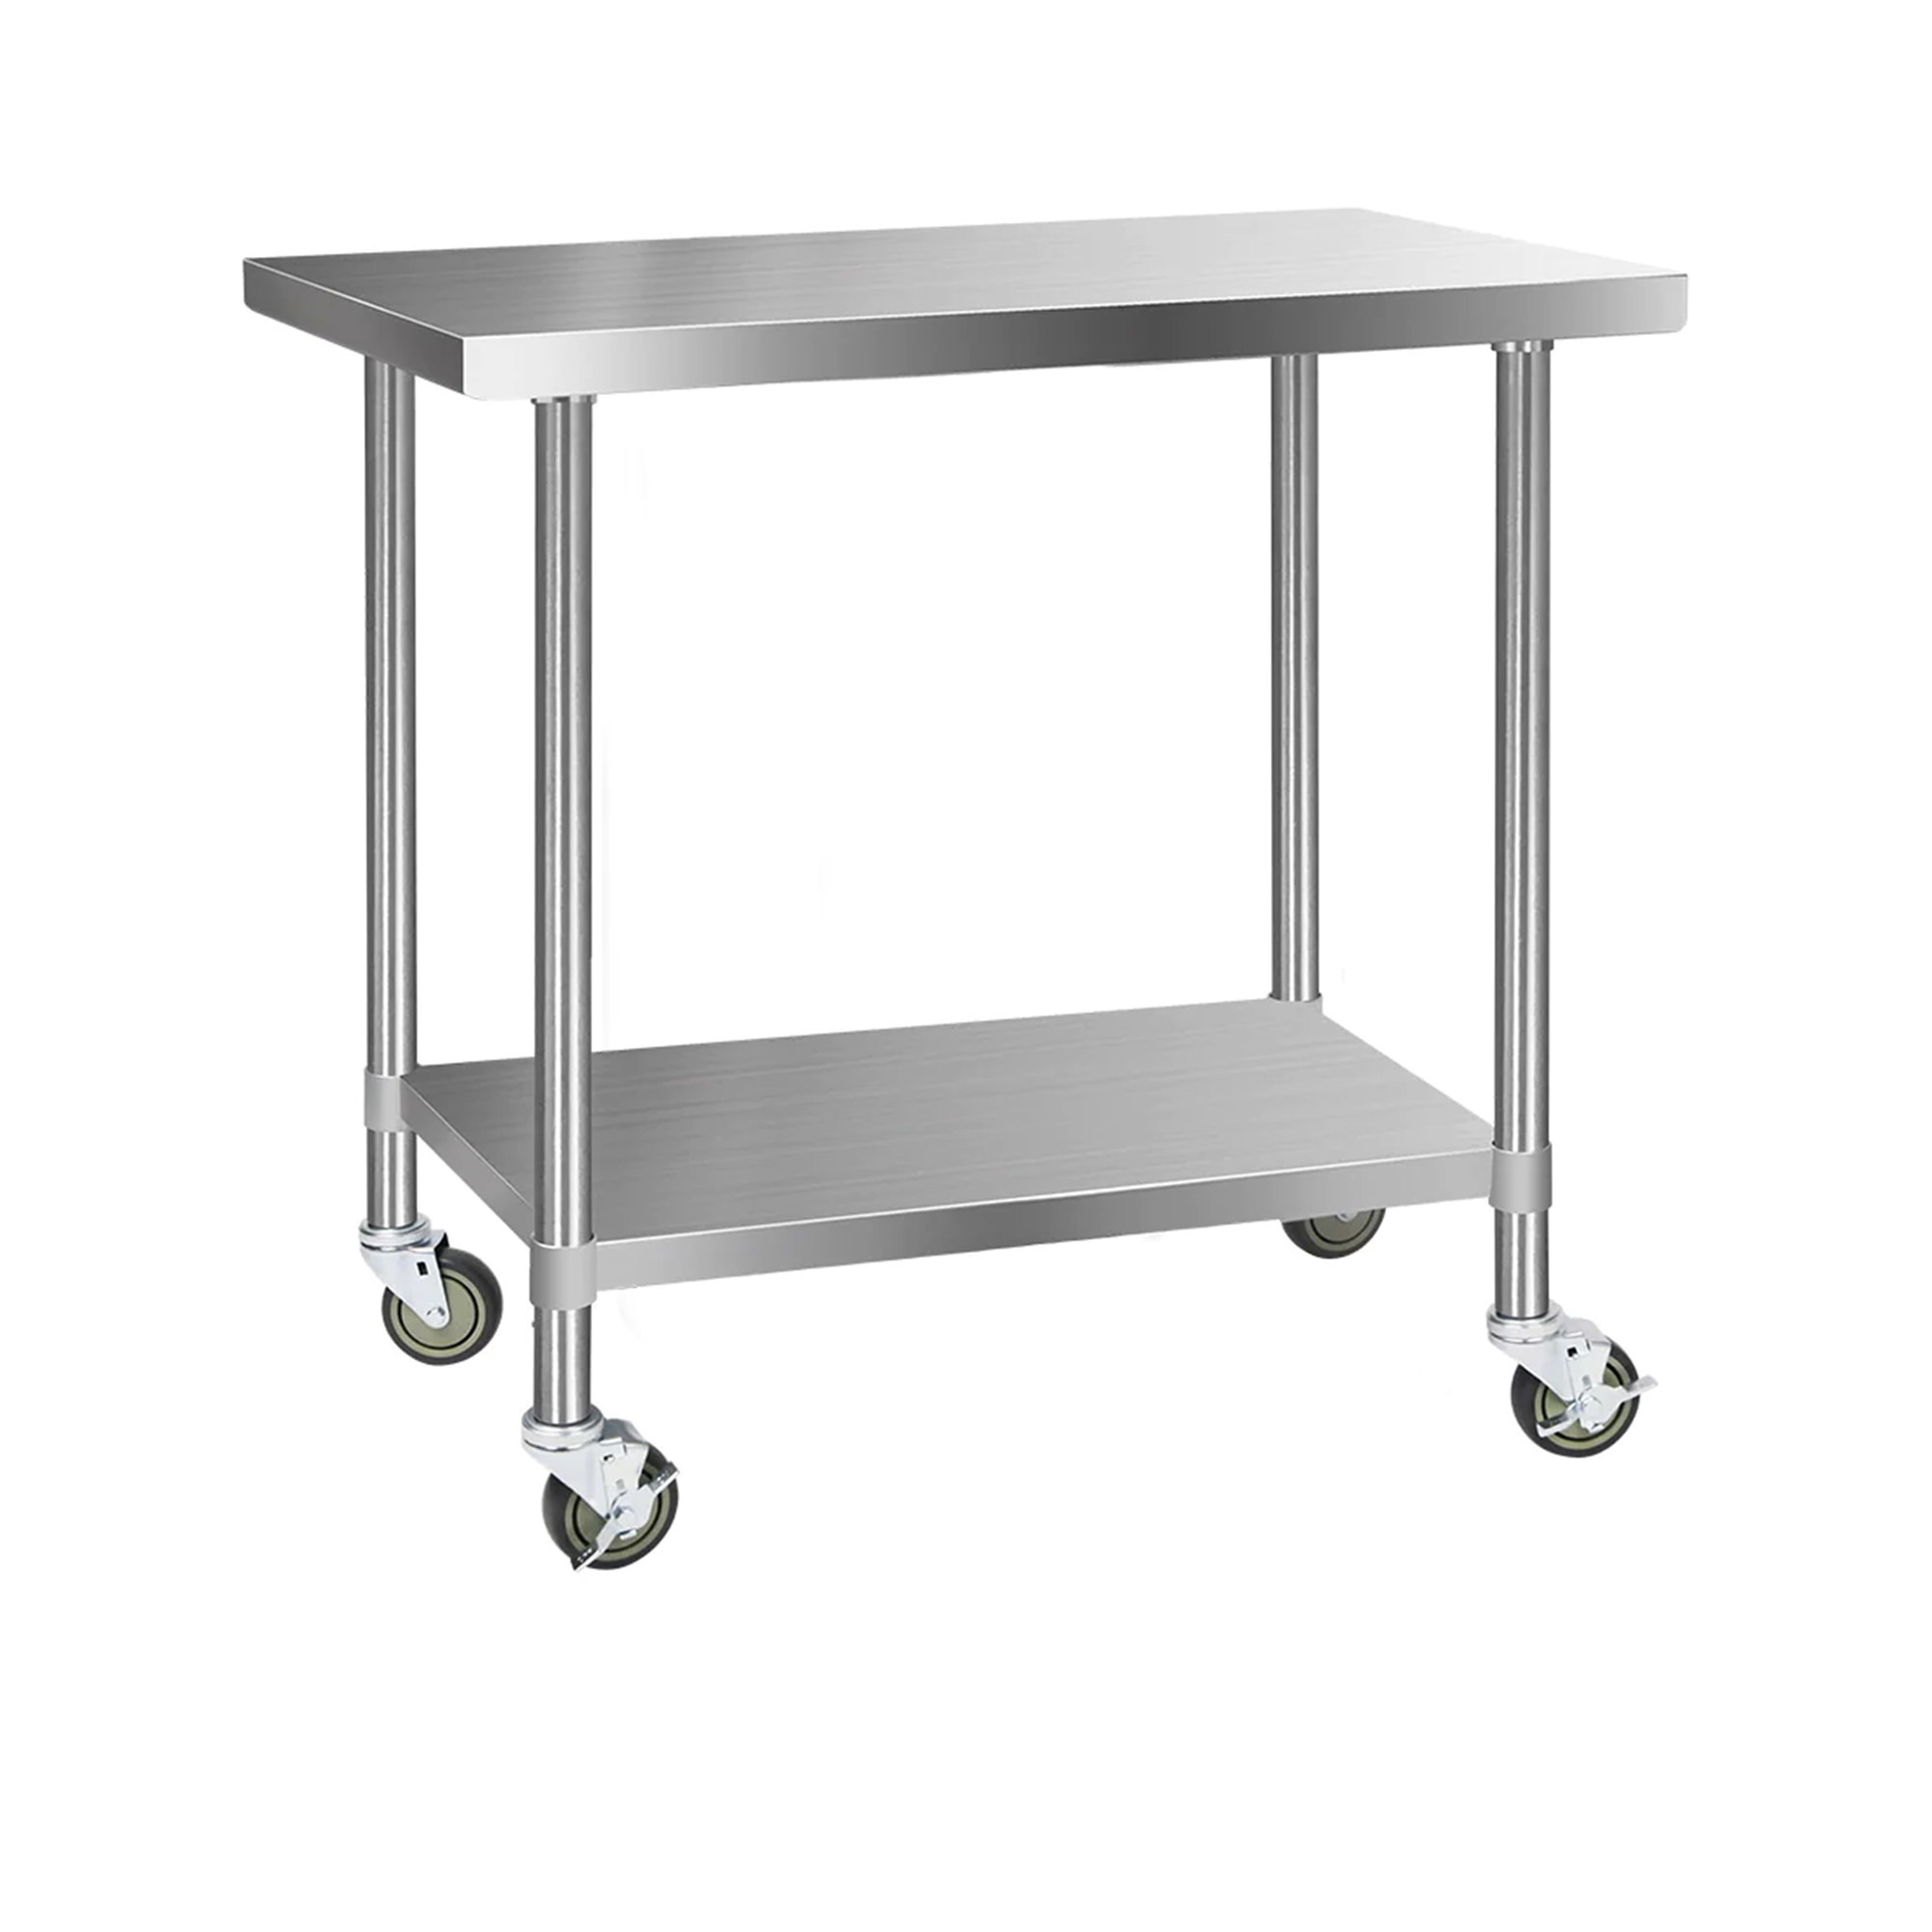 Cefito 304 Stainless Steel Kitchen Bench with Wheels 121.9x61cm Image 1